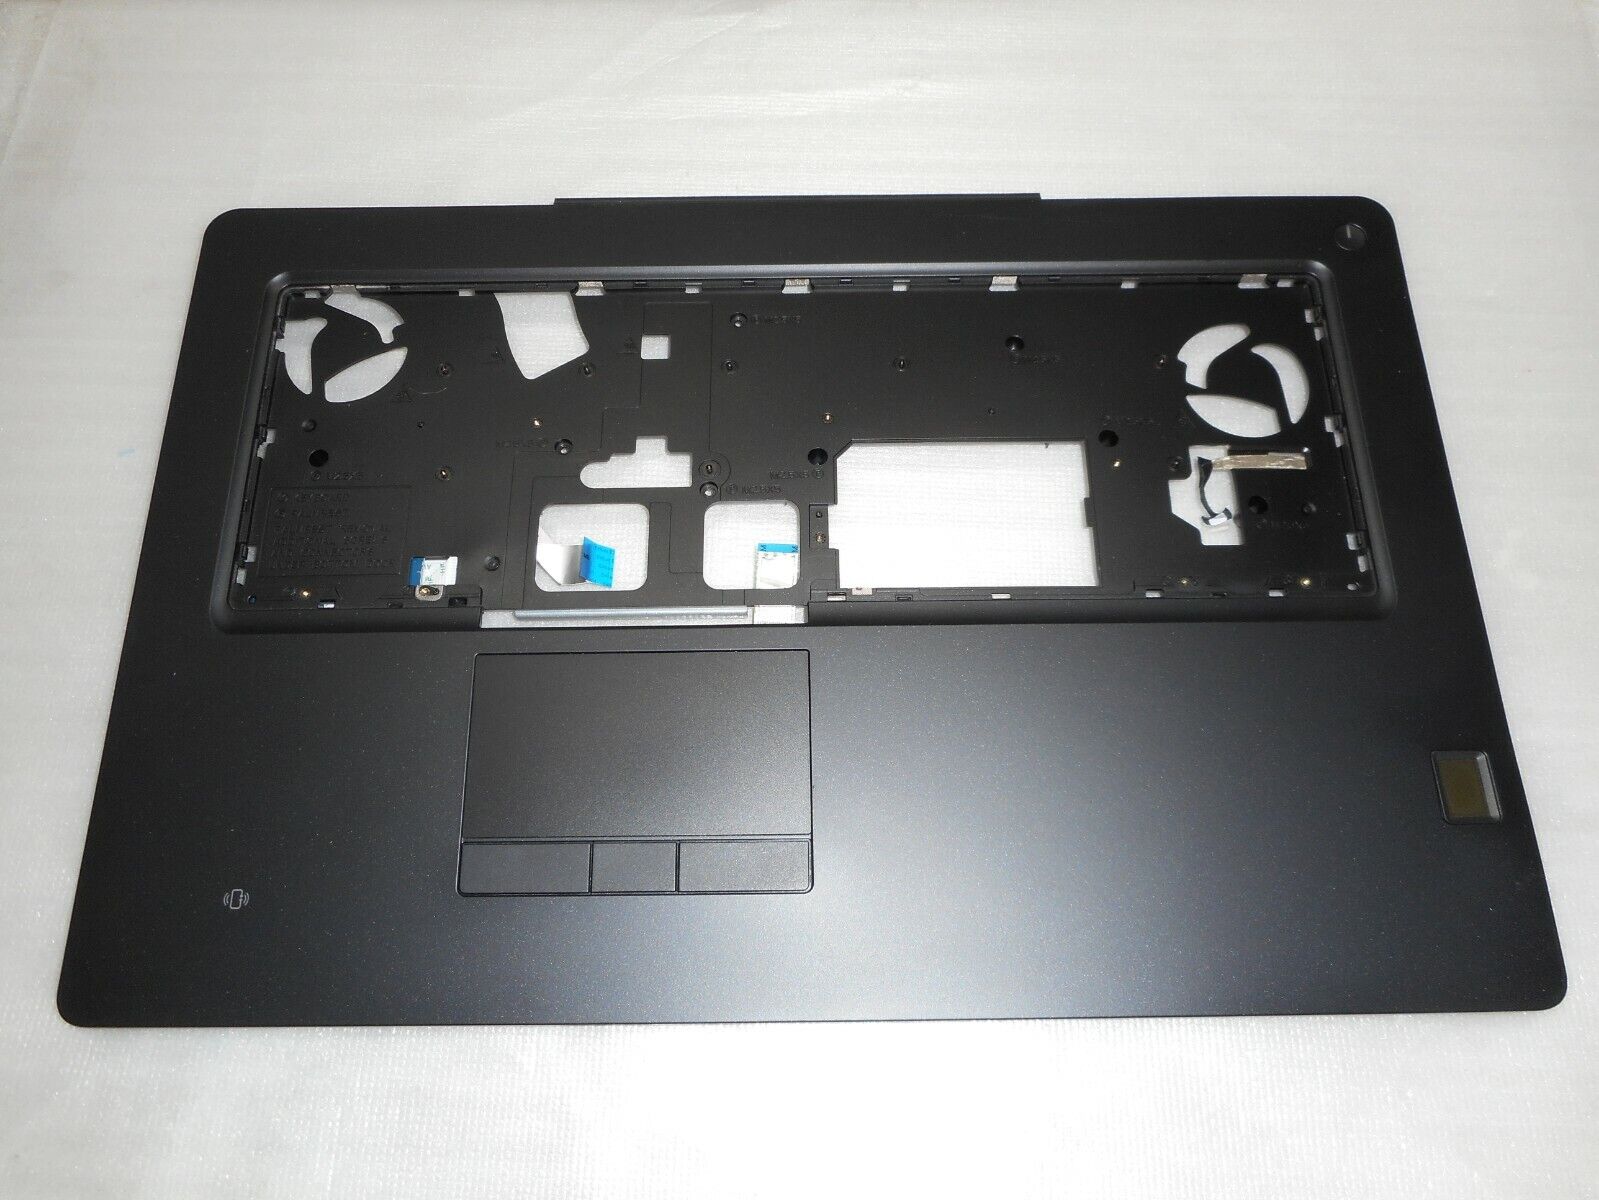 REF OEM DELL PRECISION 17 PALMREST TOUCHPAD+POWER BUTTON  A15173 DK0K5 HUA01